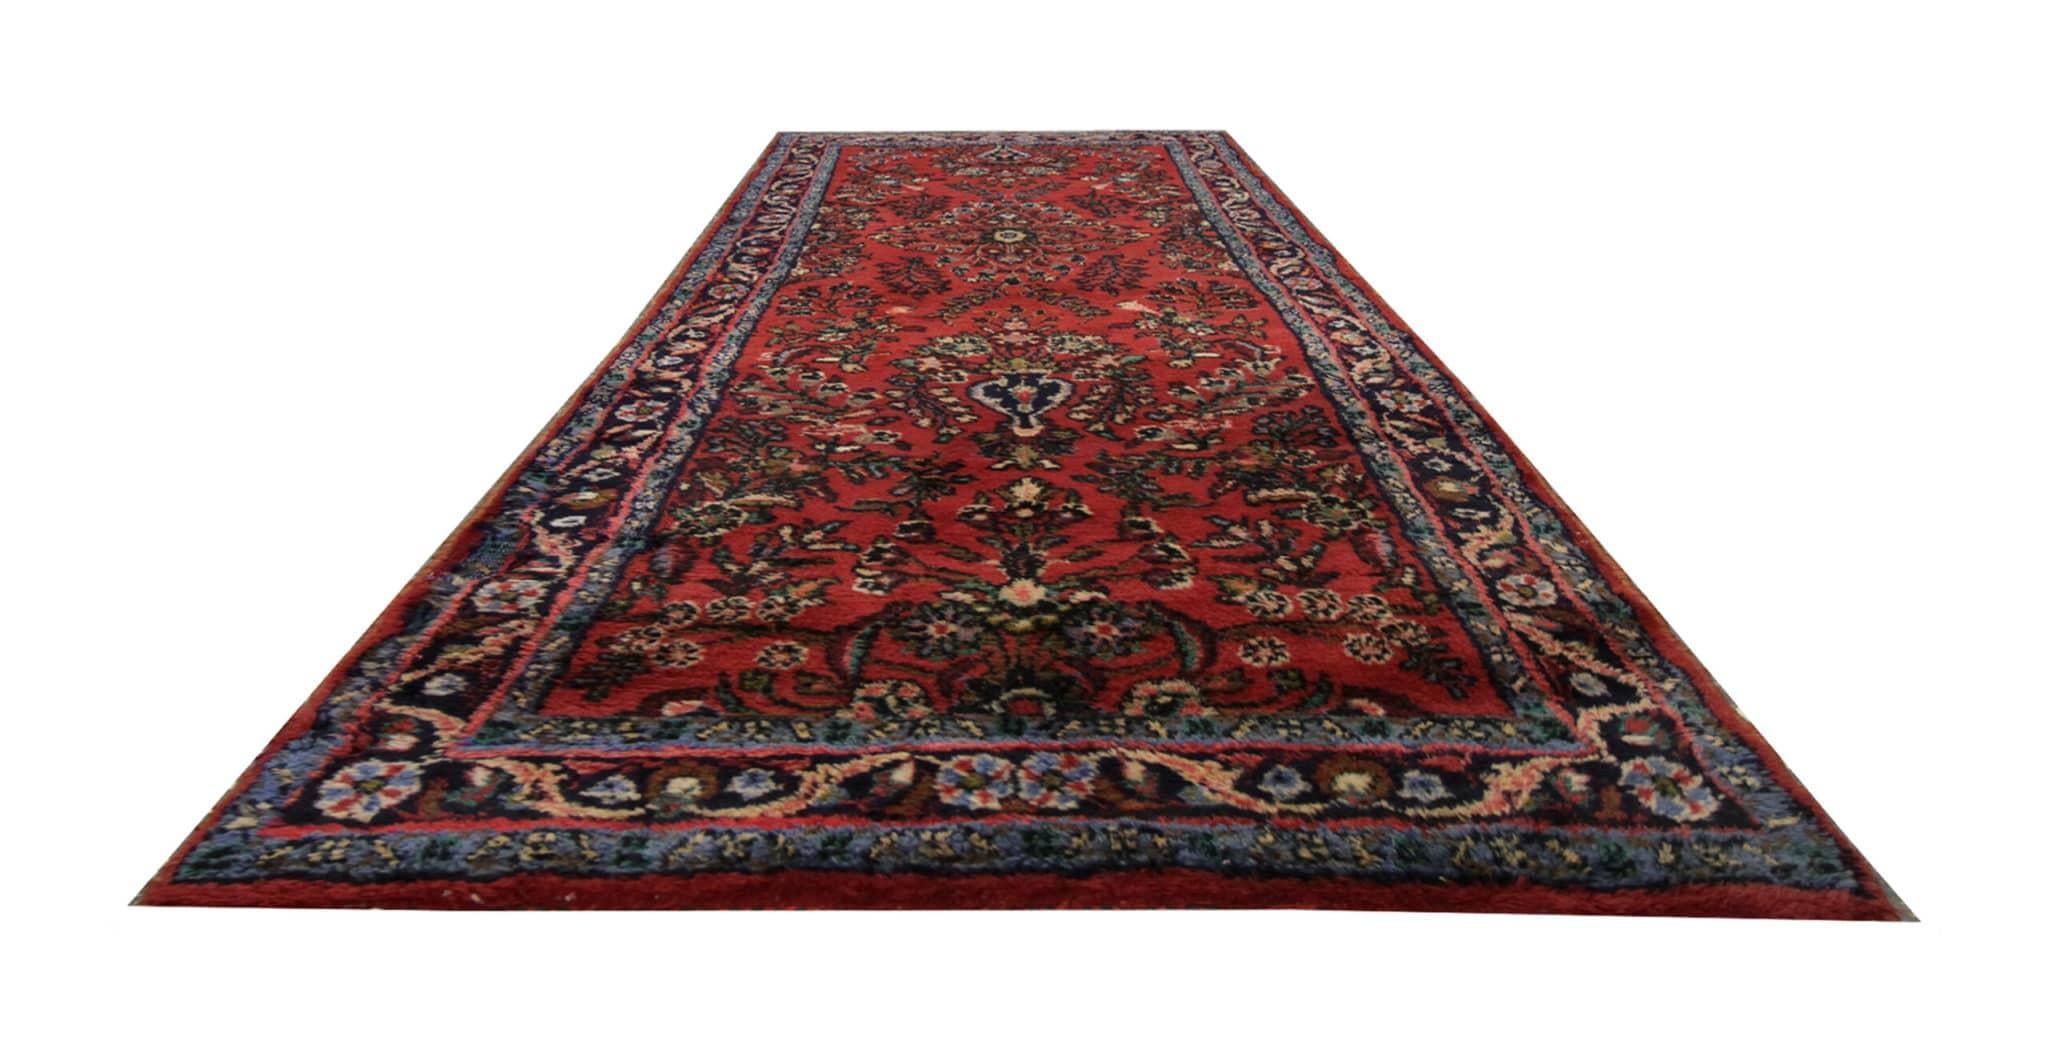 This vintage burgundy red runner rug is hand-knotted with precision and crafted from a blend of wool and cotton, this rug boasts a charming floral design that exudes rustic elegance. Dating back to the 1960s, its vintage allure adds character to any